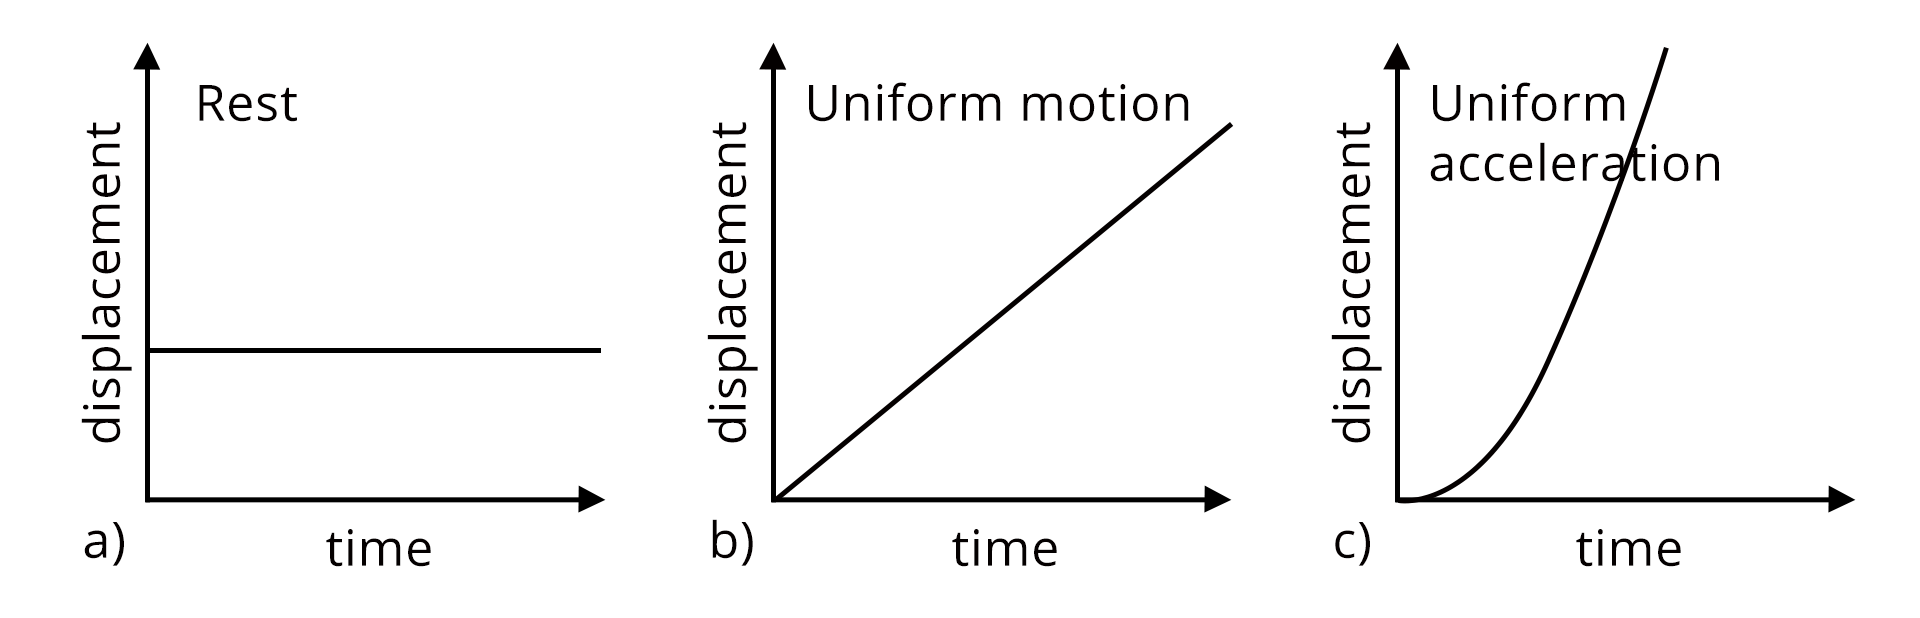 Displacement-time graph for different types of motion